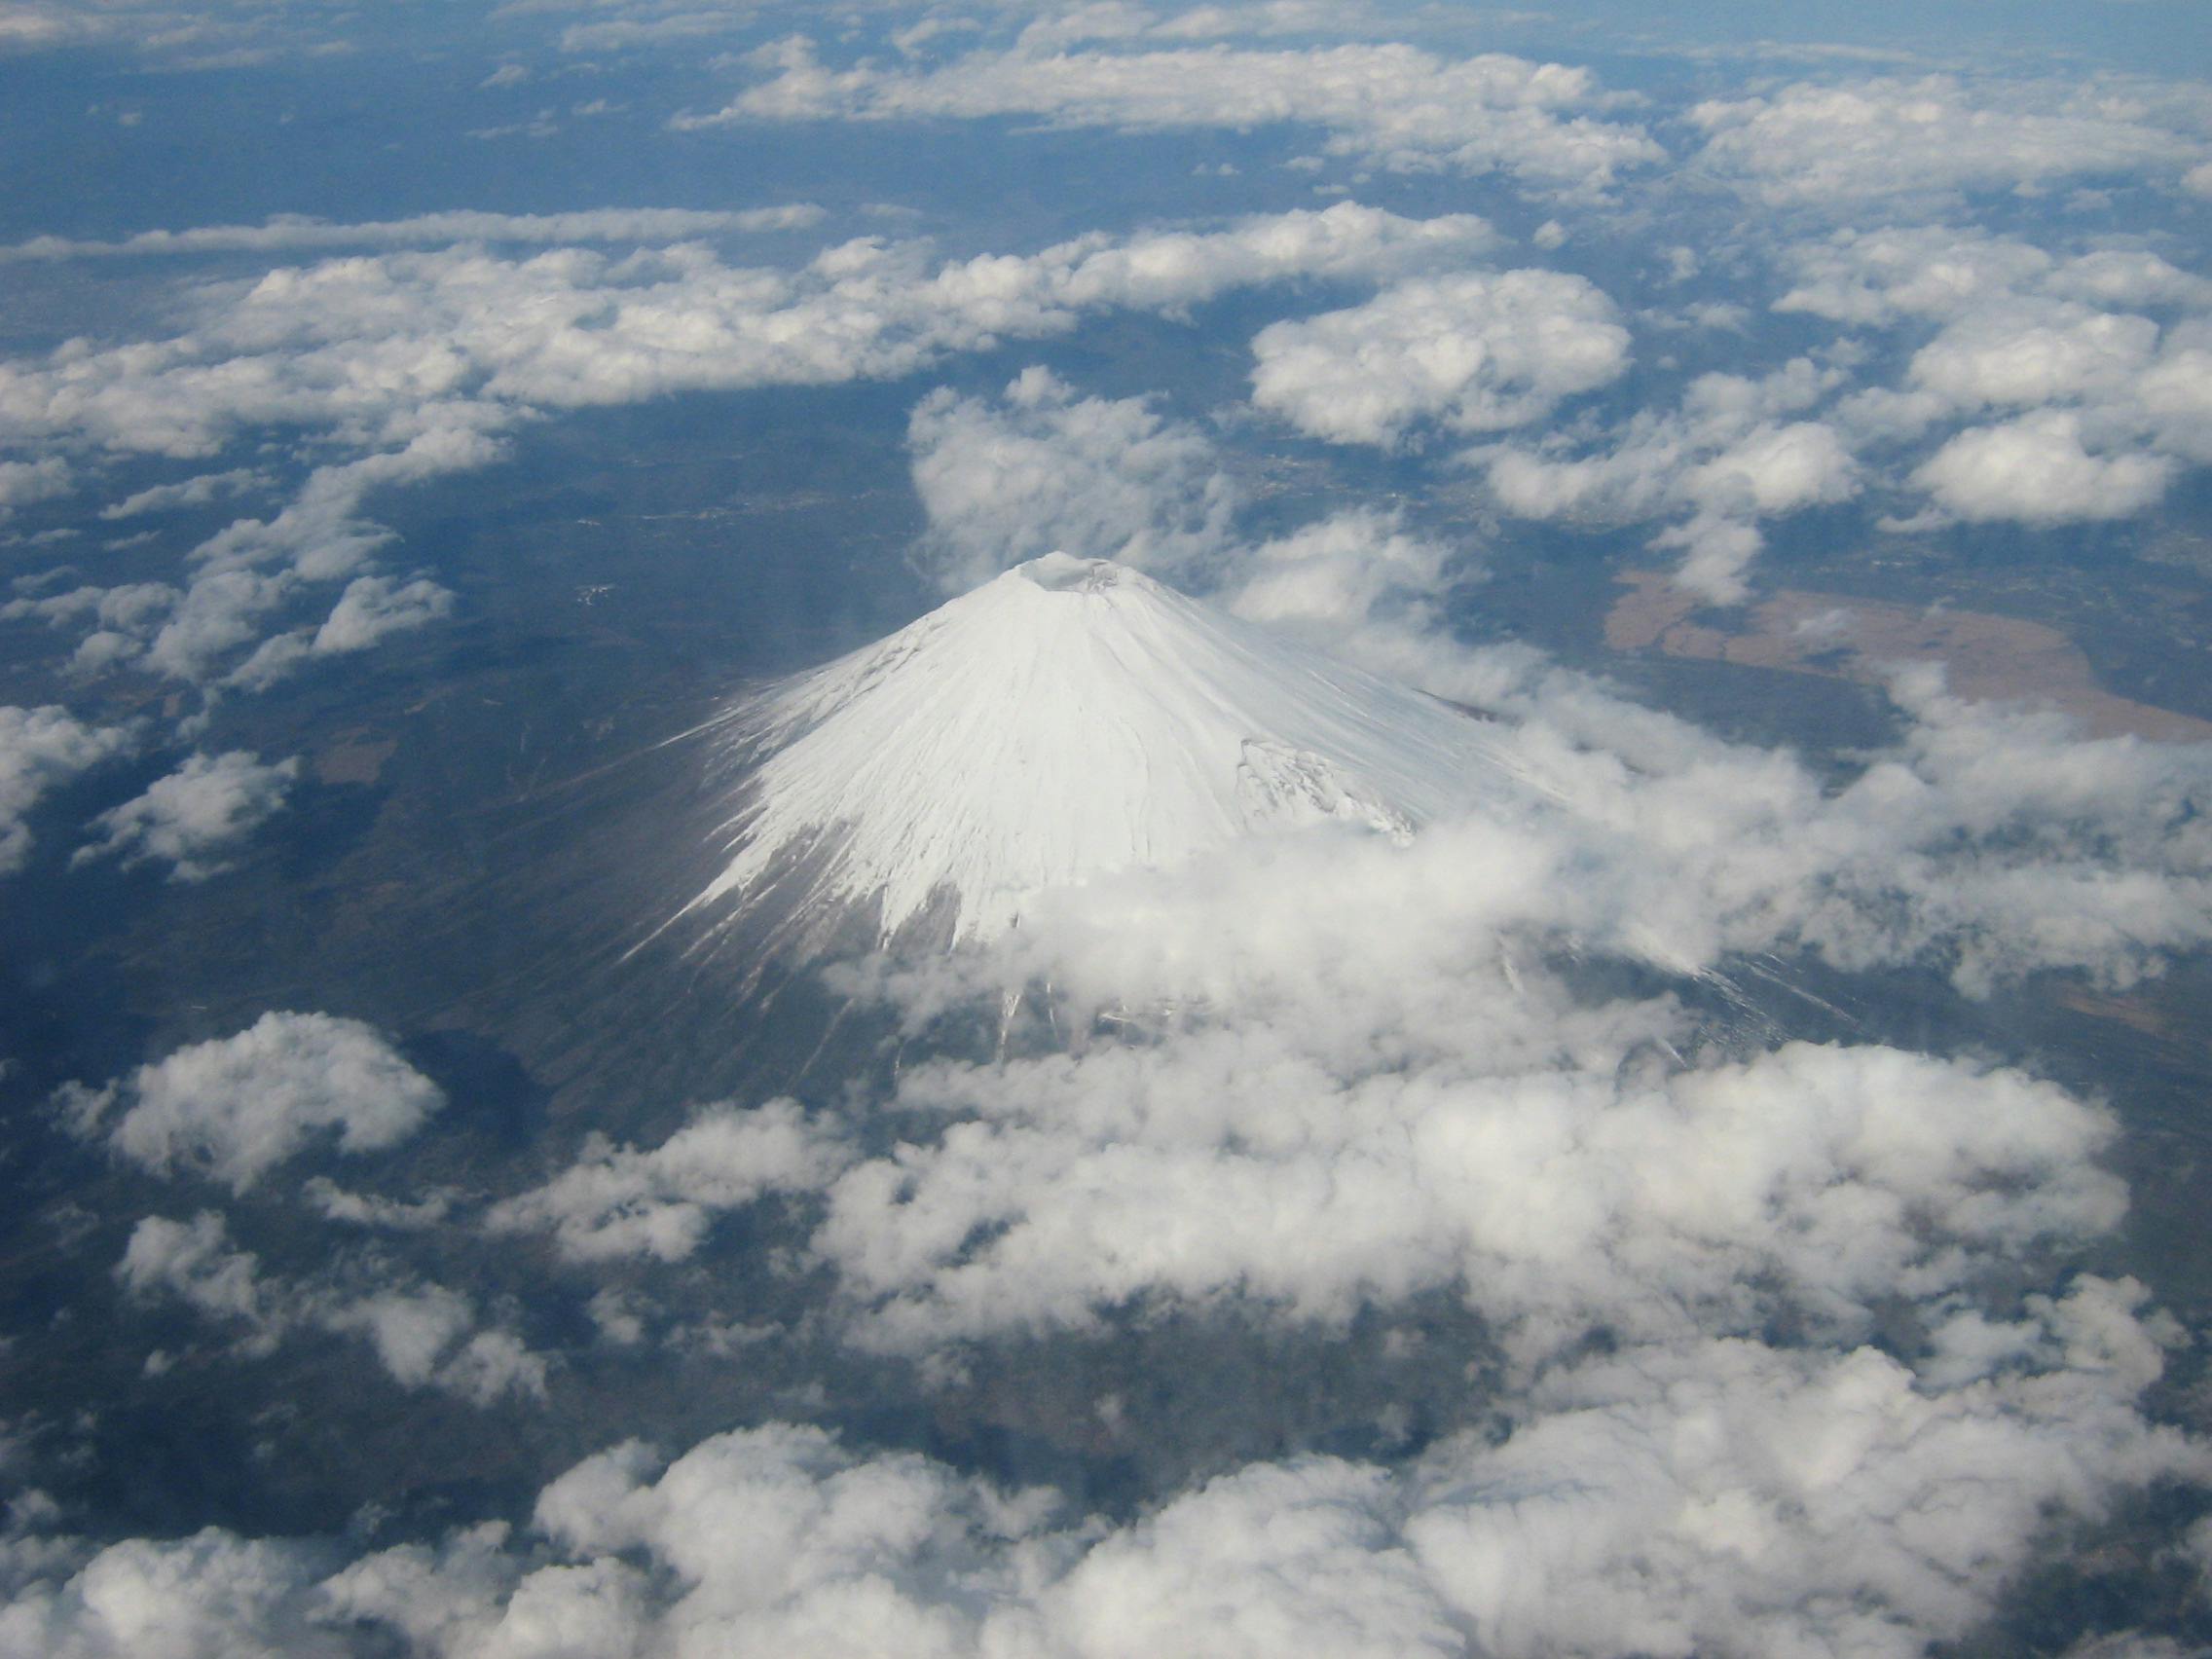 A photo of Mt. Fuji covered in snow, taken from an airplane.